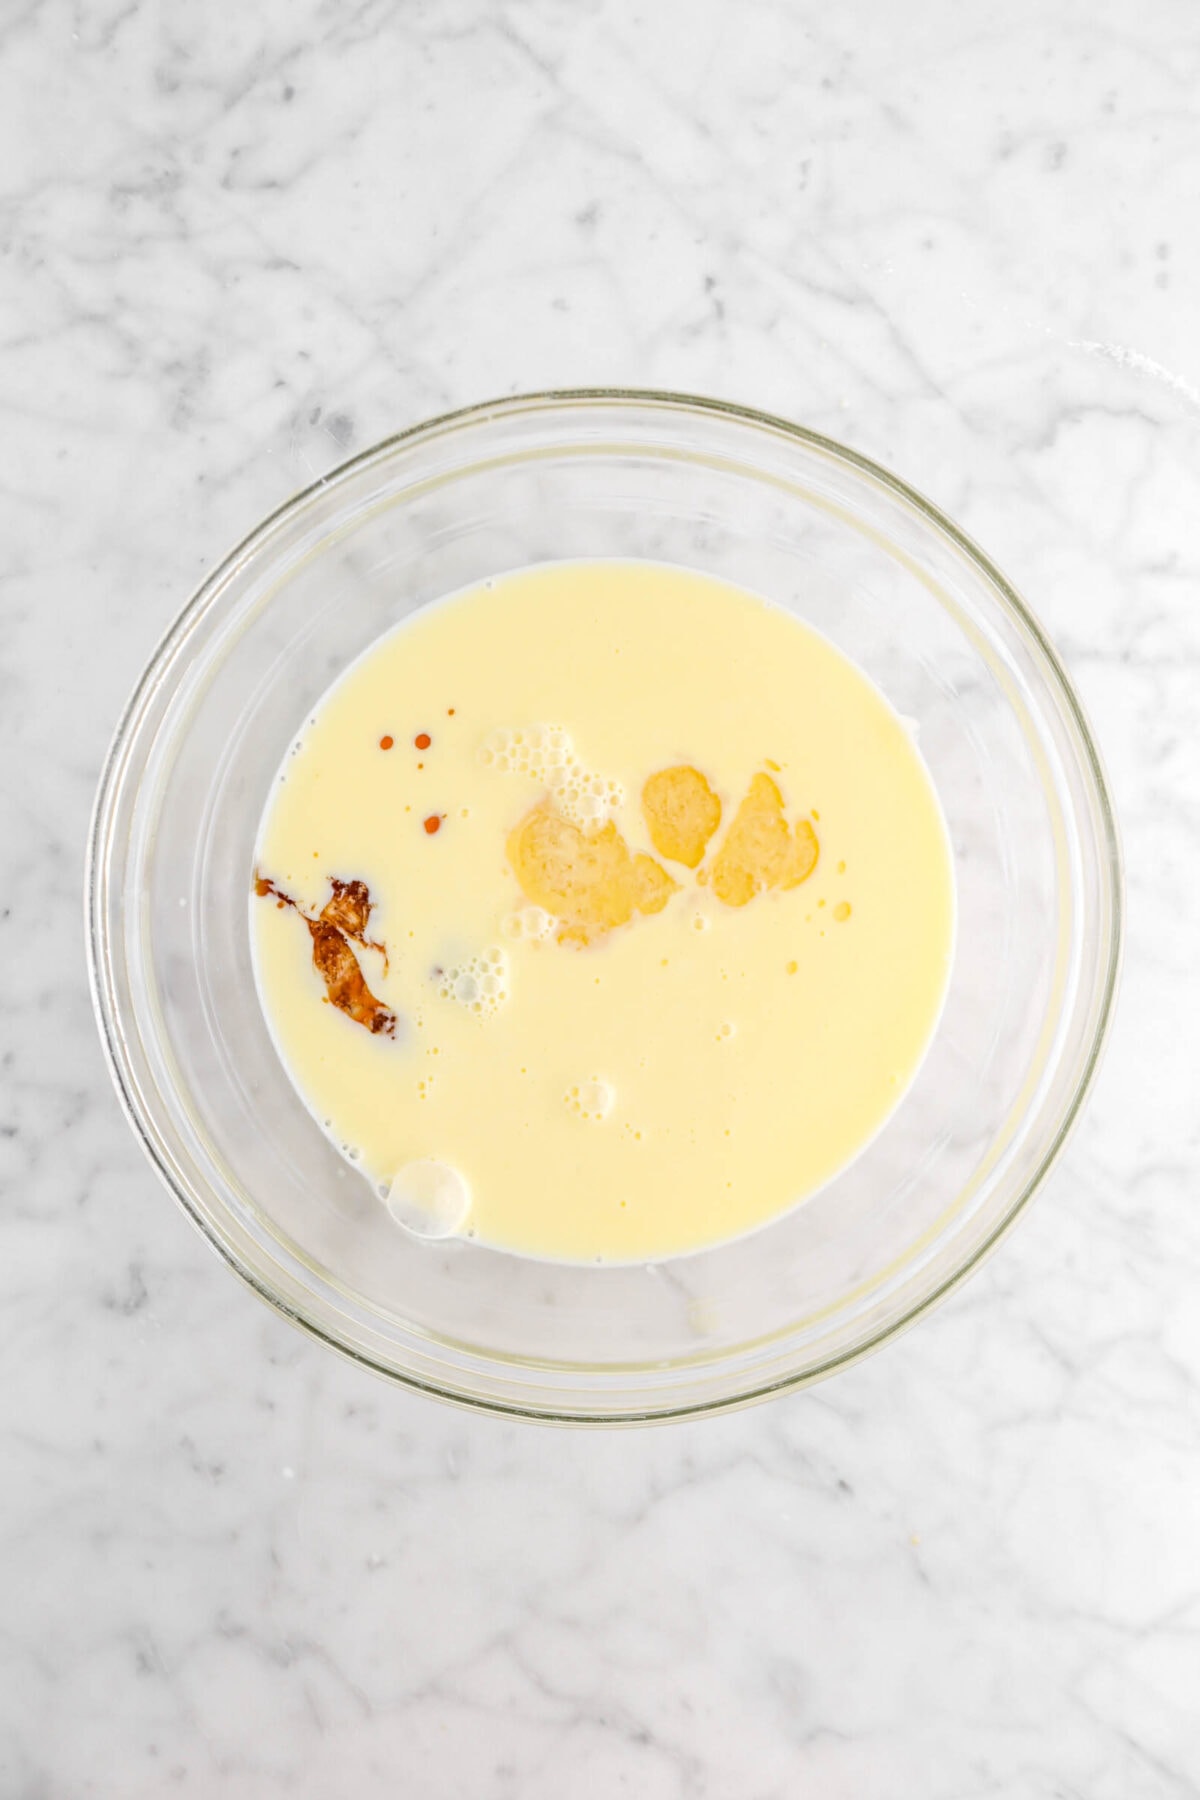 bourbon and vanilla added to creme anglaise